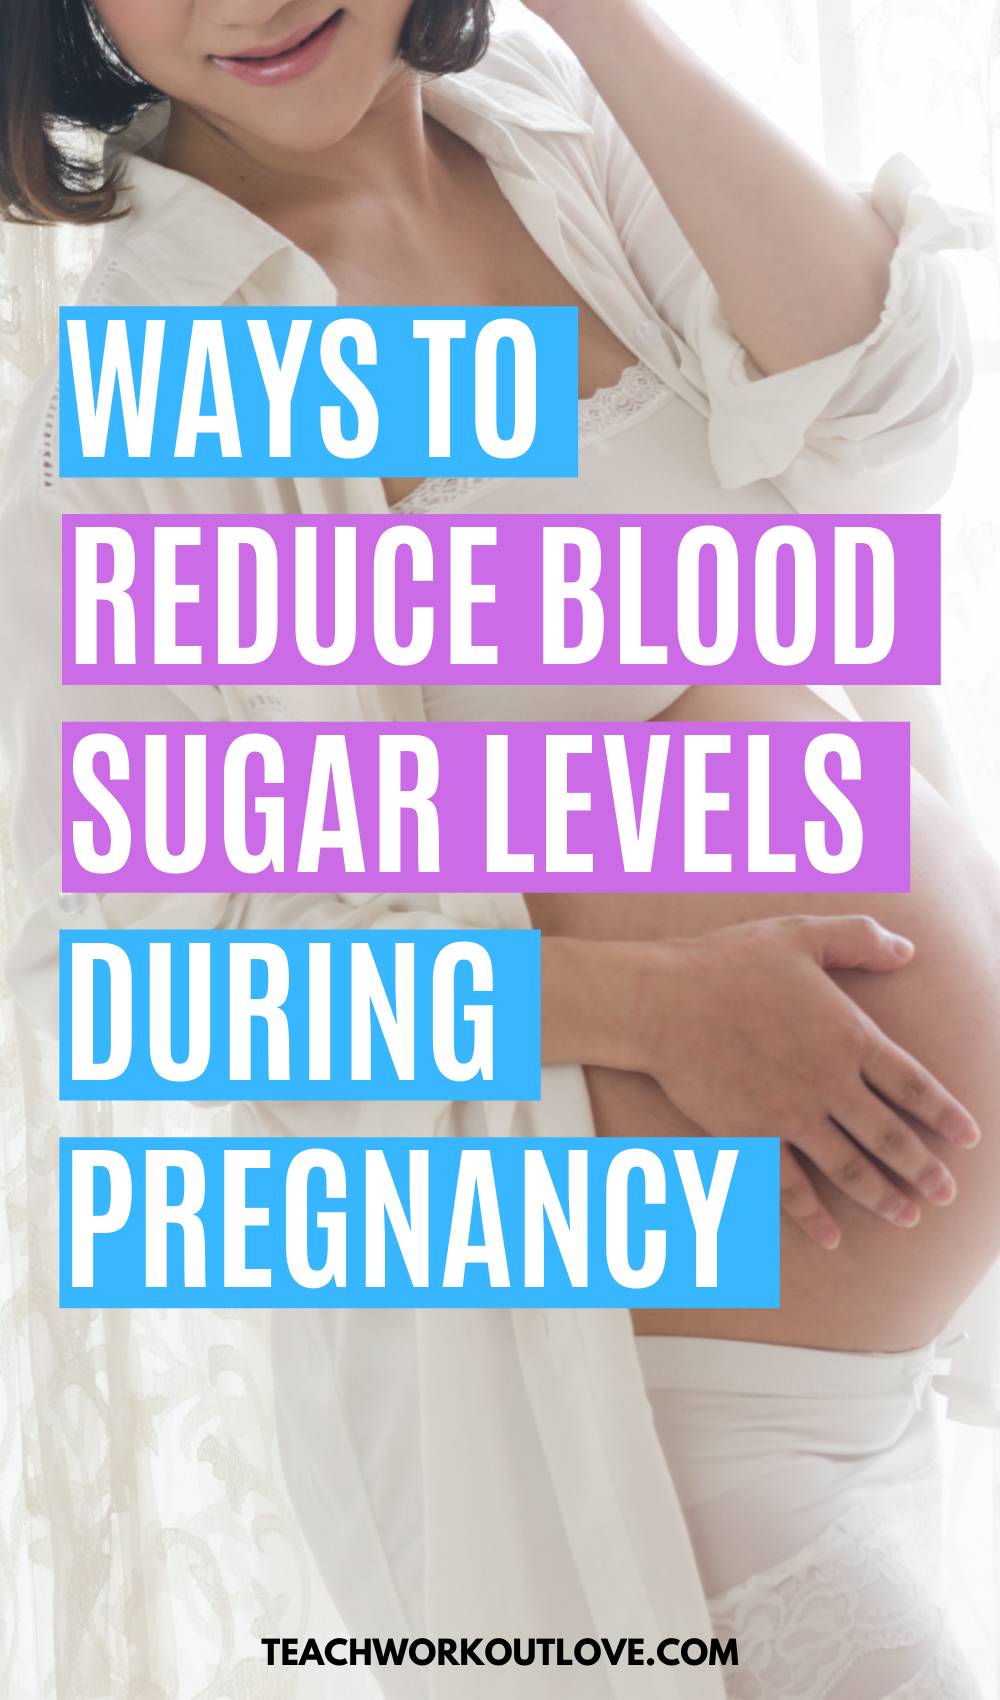 That’s why it is essential for you to reduce your blood sugar before you start a family. Check our tips to manage your diabetes and healthy pregnancy: